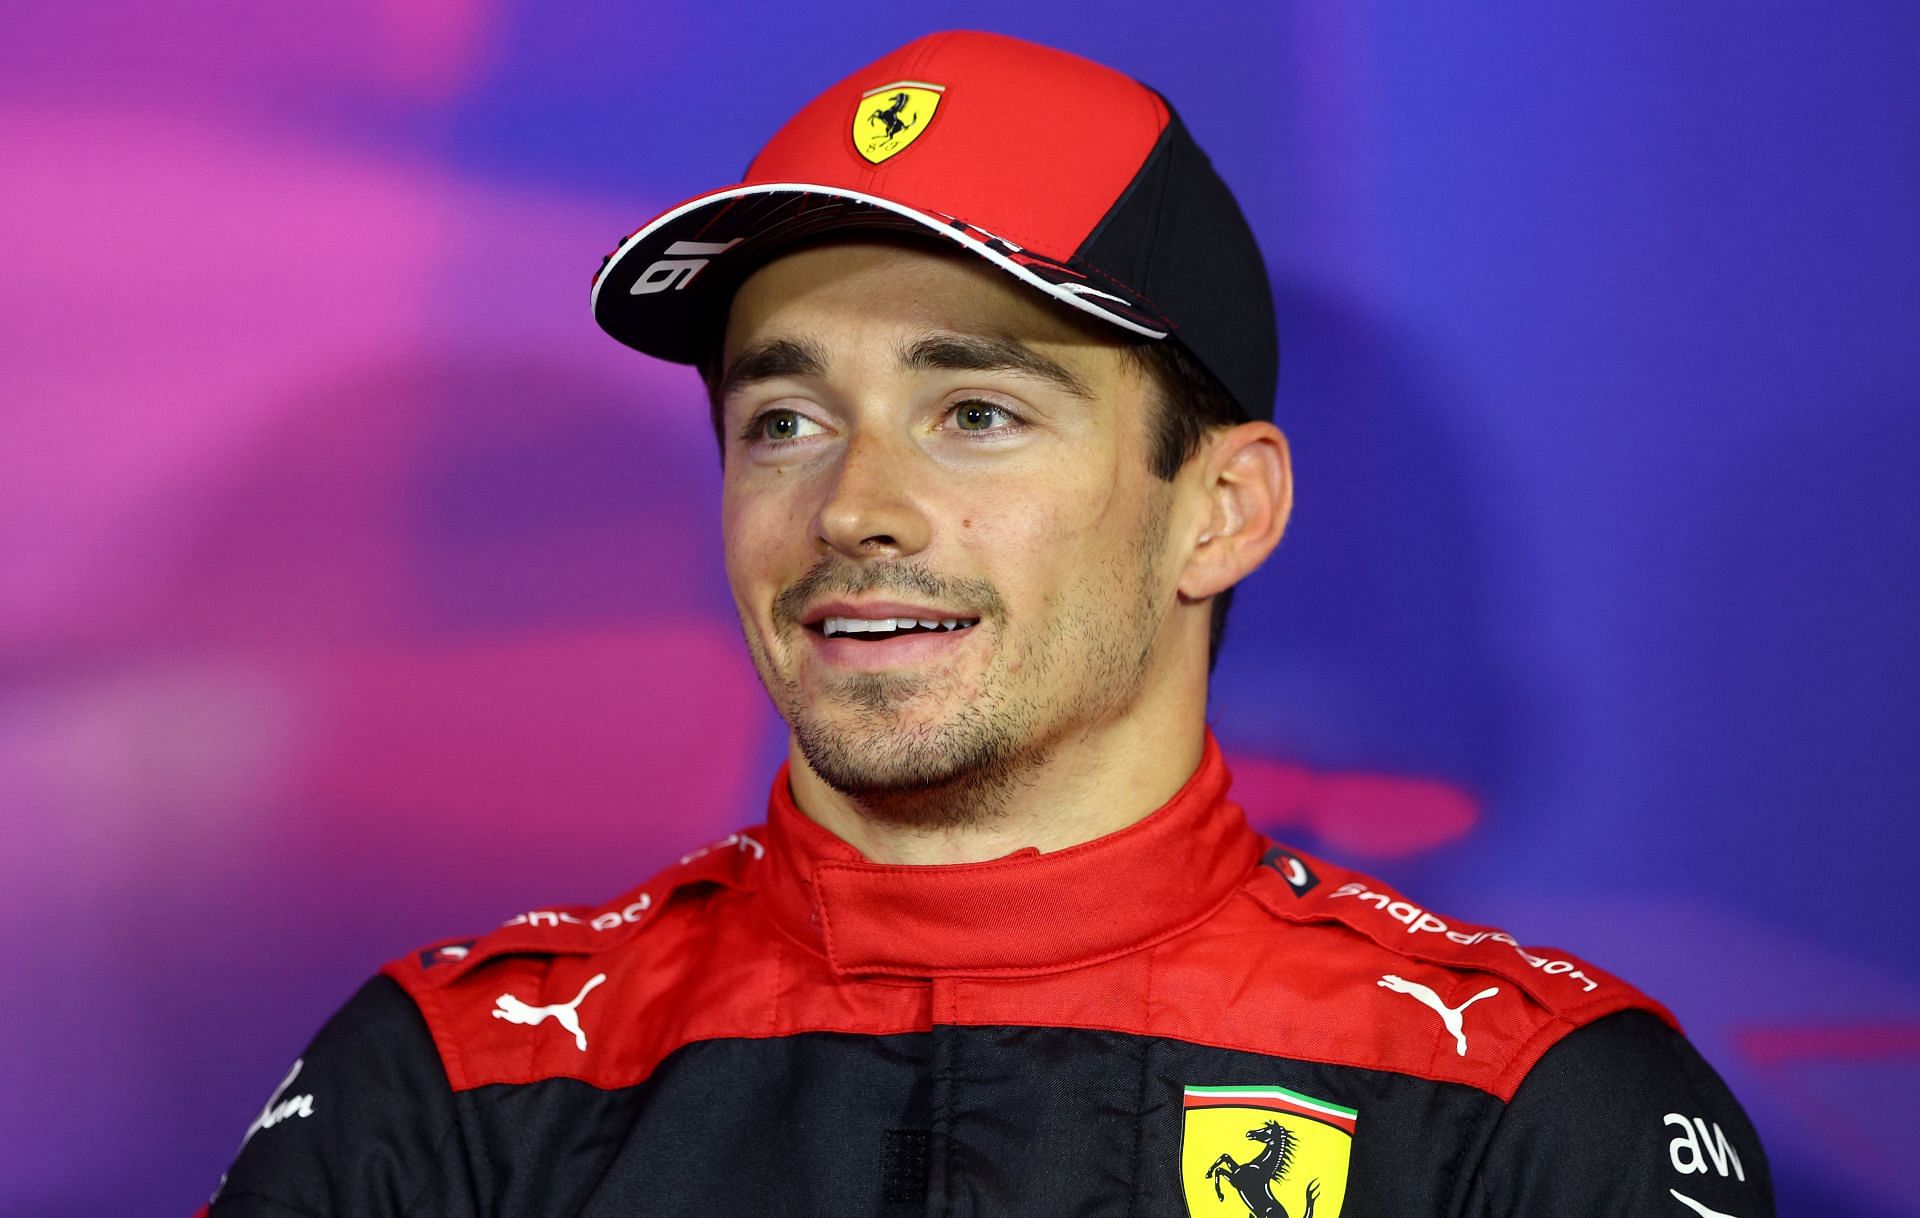 Charles Leclerc was a standout at the 2022 F1 British GP